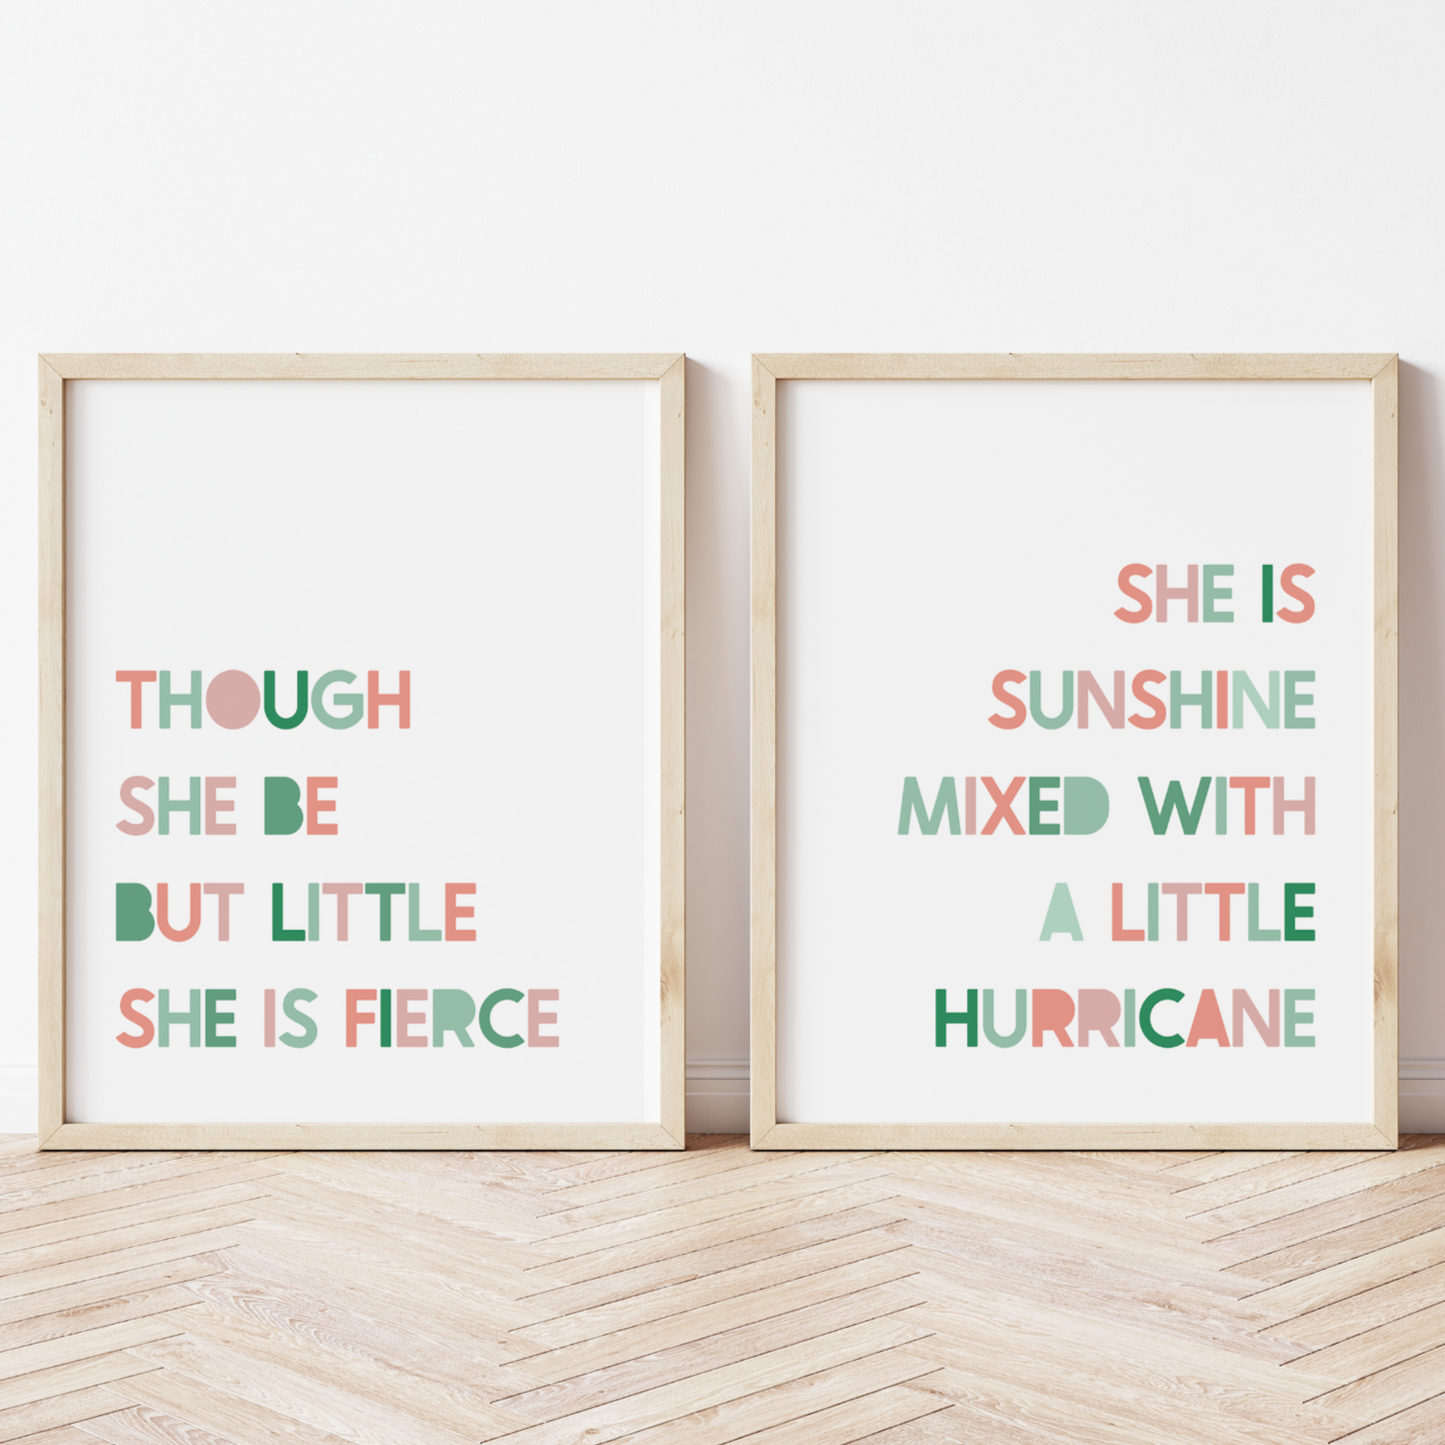 PRINT SET | Though She Be But Little & She is Sunshine